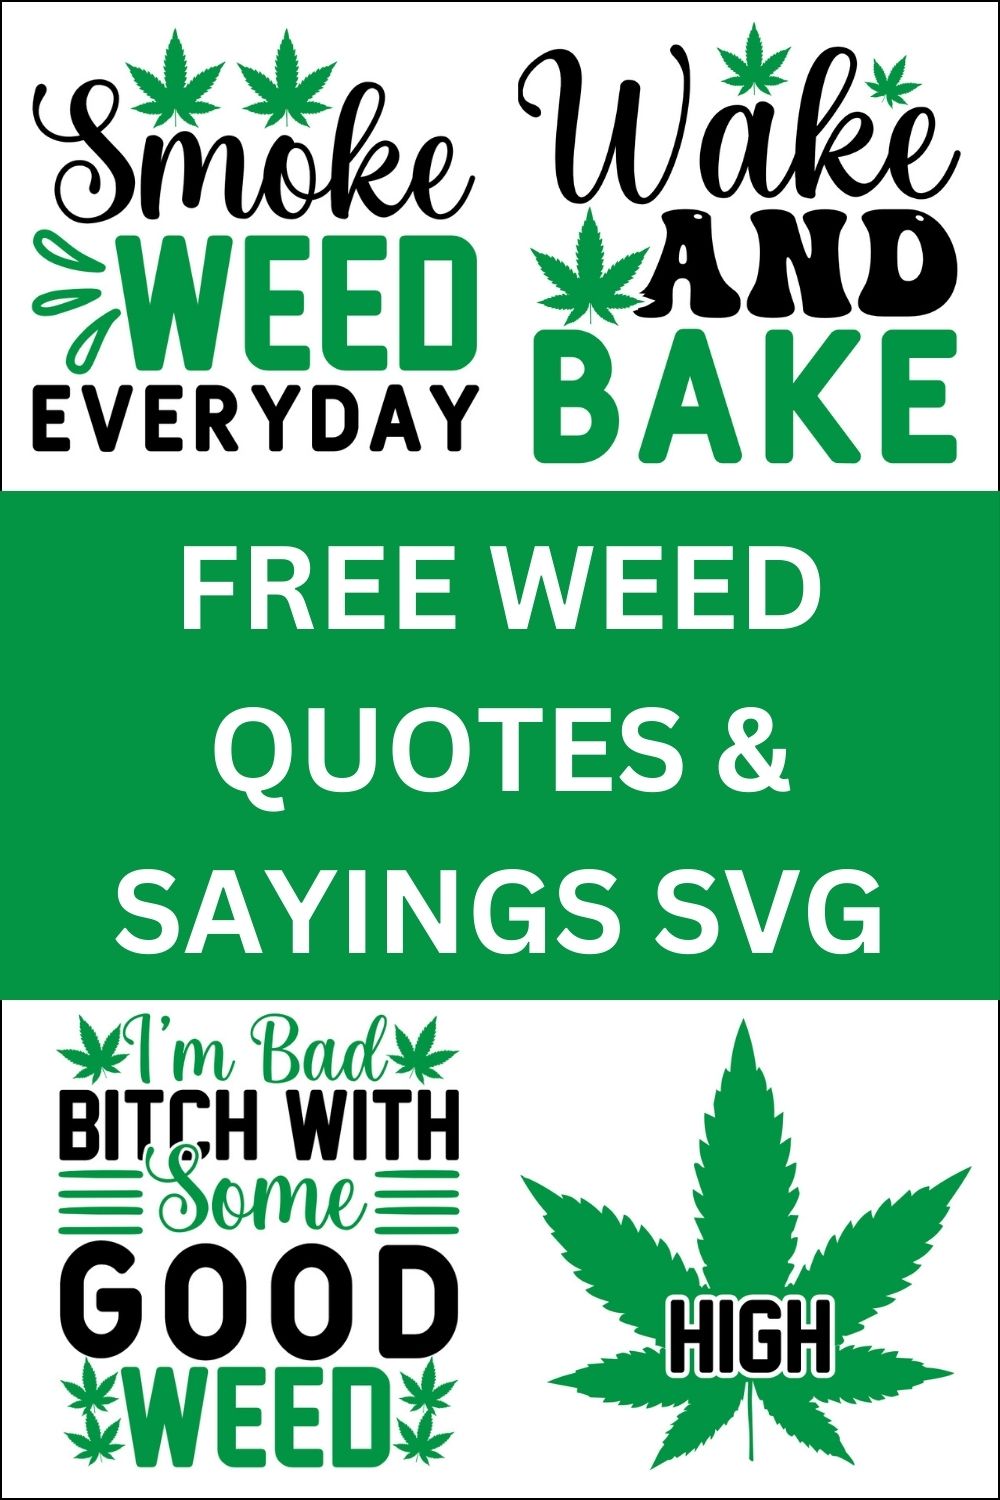 Weed Sayings, Weed quotes, Clip arts , Cut files for cricut, silhouette, Weed SVG, Marijuana , Cannabis, Smoke weed, Blunt, Weed Leaf, svg file, template, pattern, stencil, silhouette, cut file, design space, vector, shirt, cup, DIY crafts and projects, embroidery